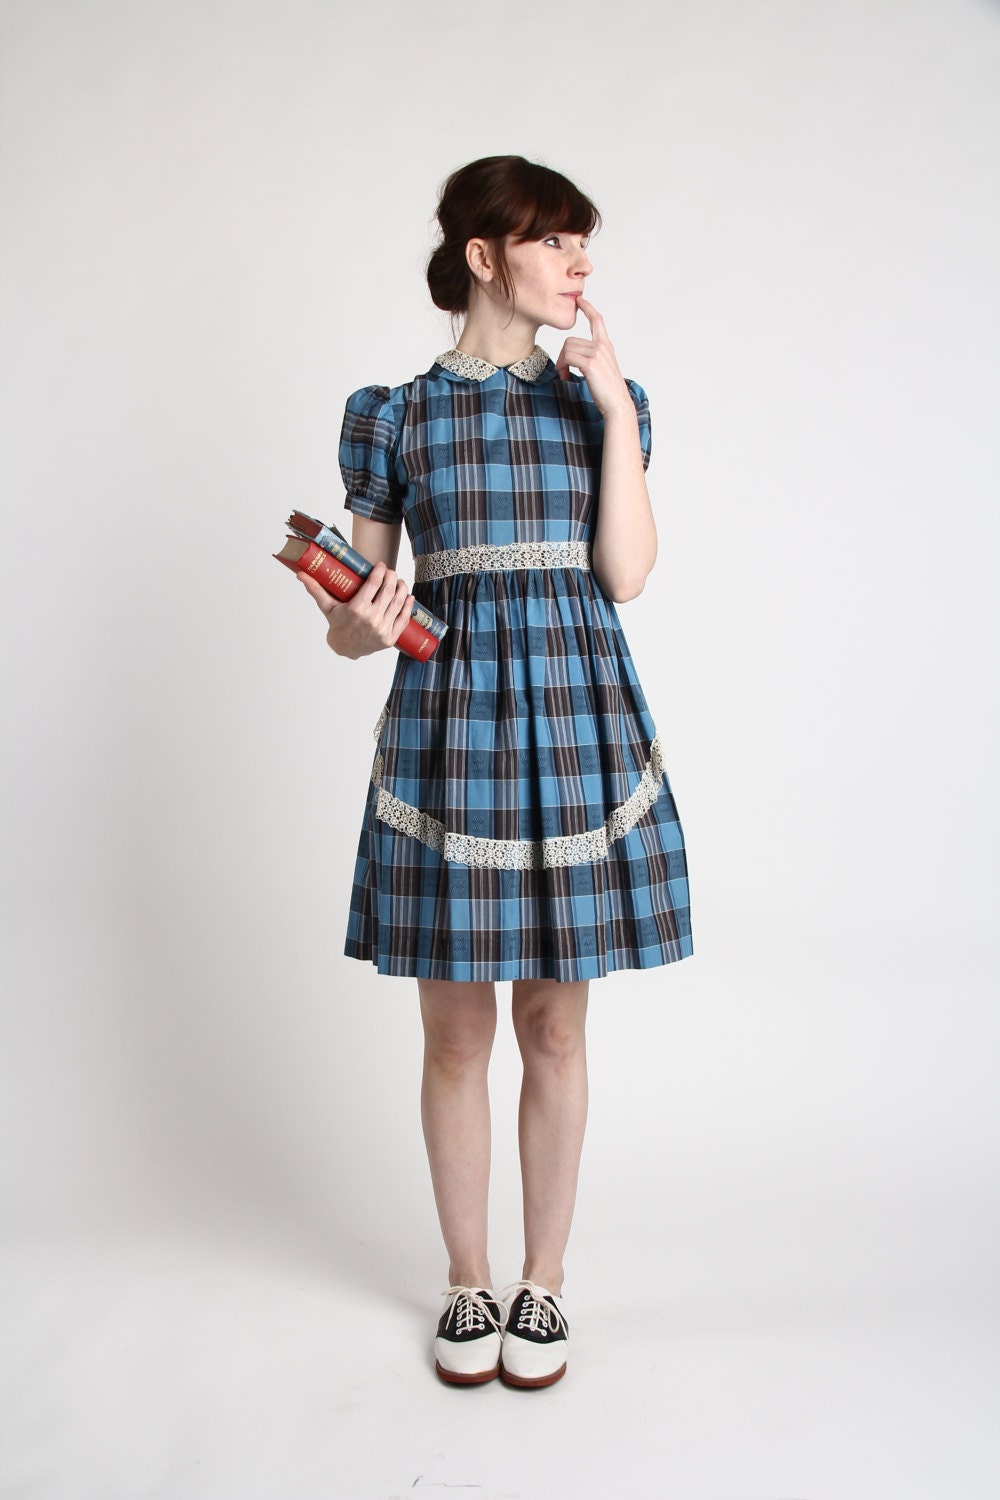 1950s Plaid Dress . Blue Baby Doll Frock with Lace - VeraVague